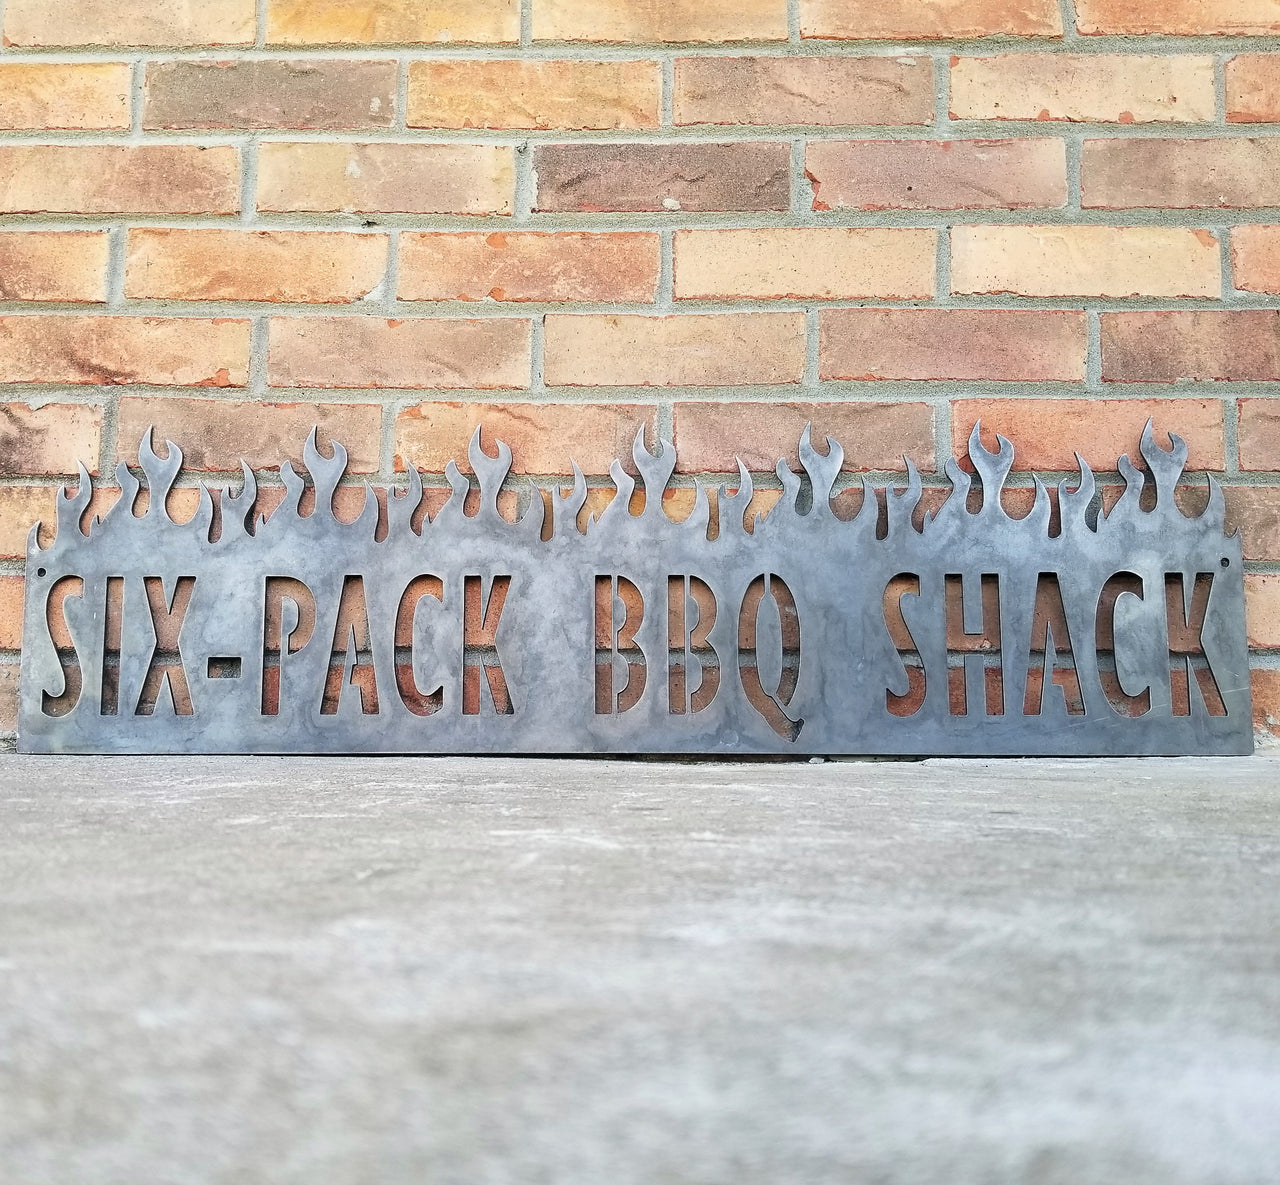 Personalized Metal BBQ Sign - Barbeque, Barbecue, Smoker Decor - Green Egg, Traeger